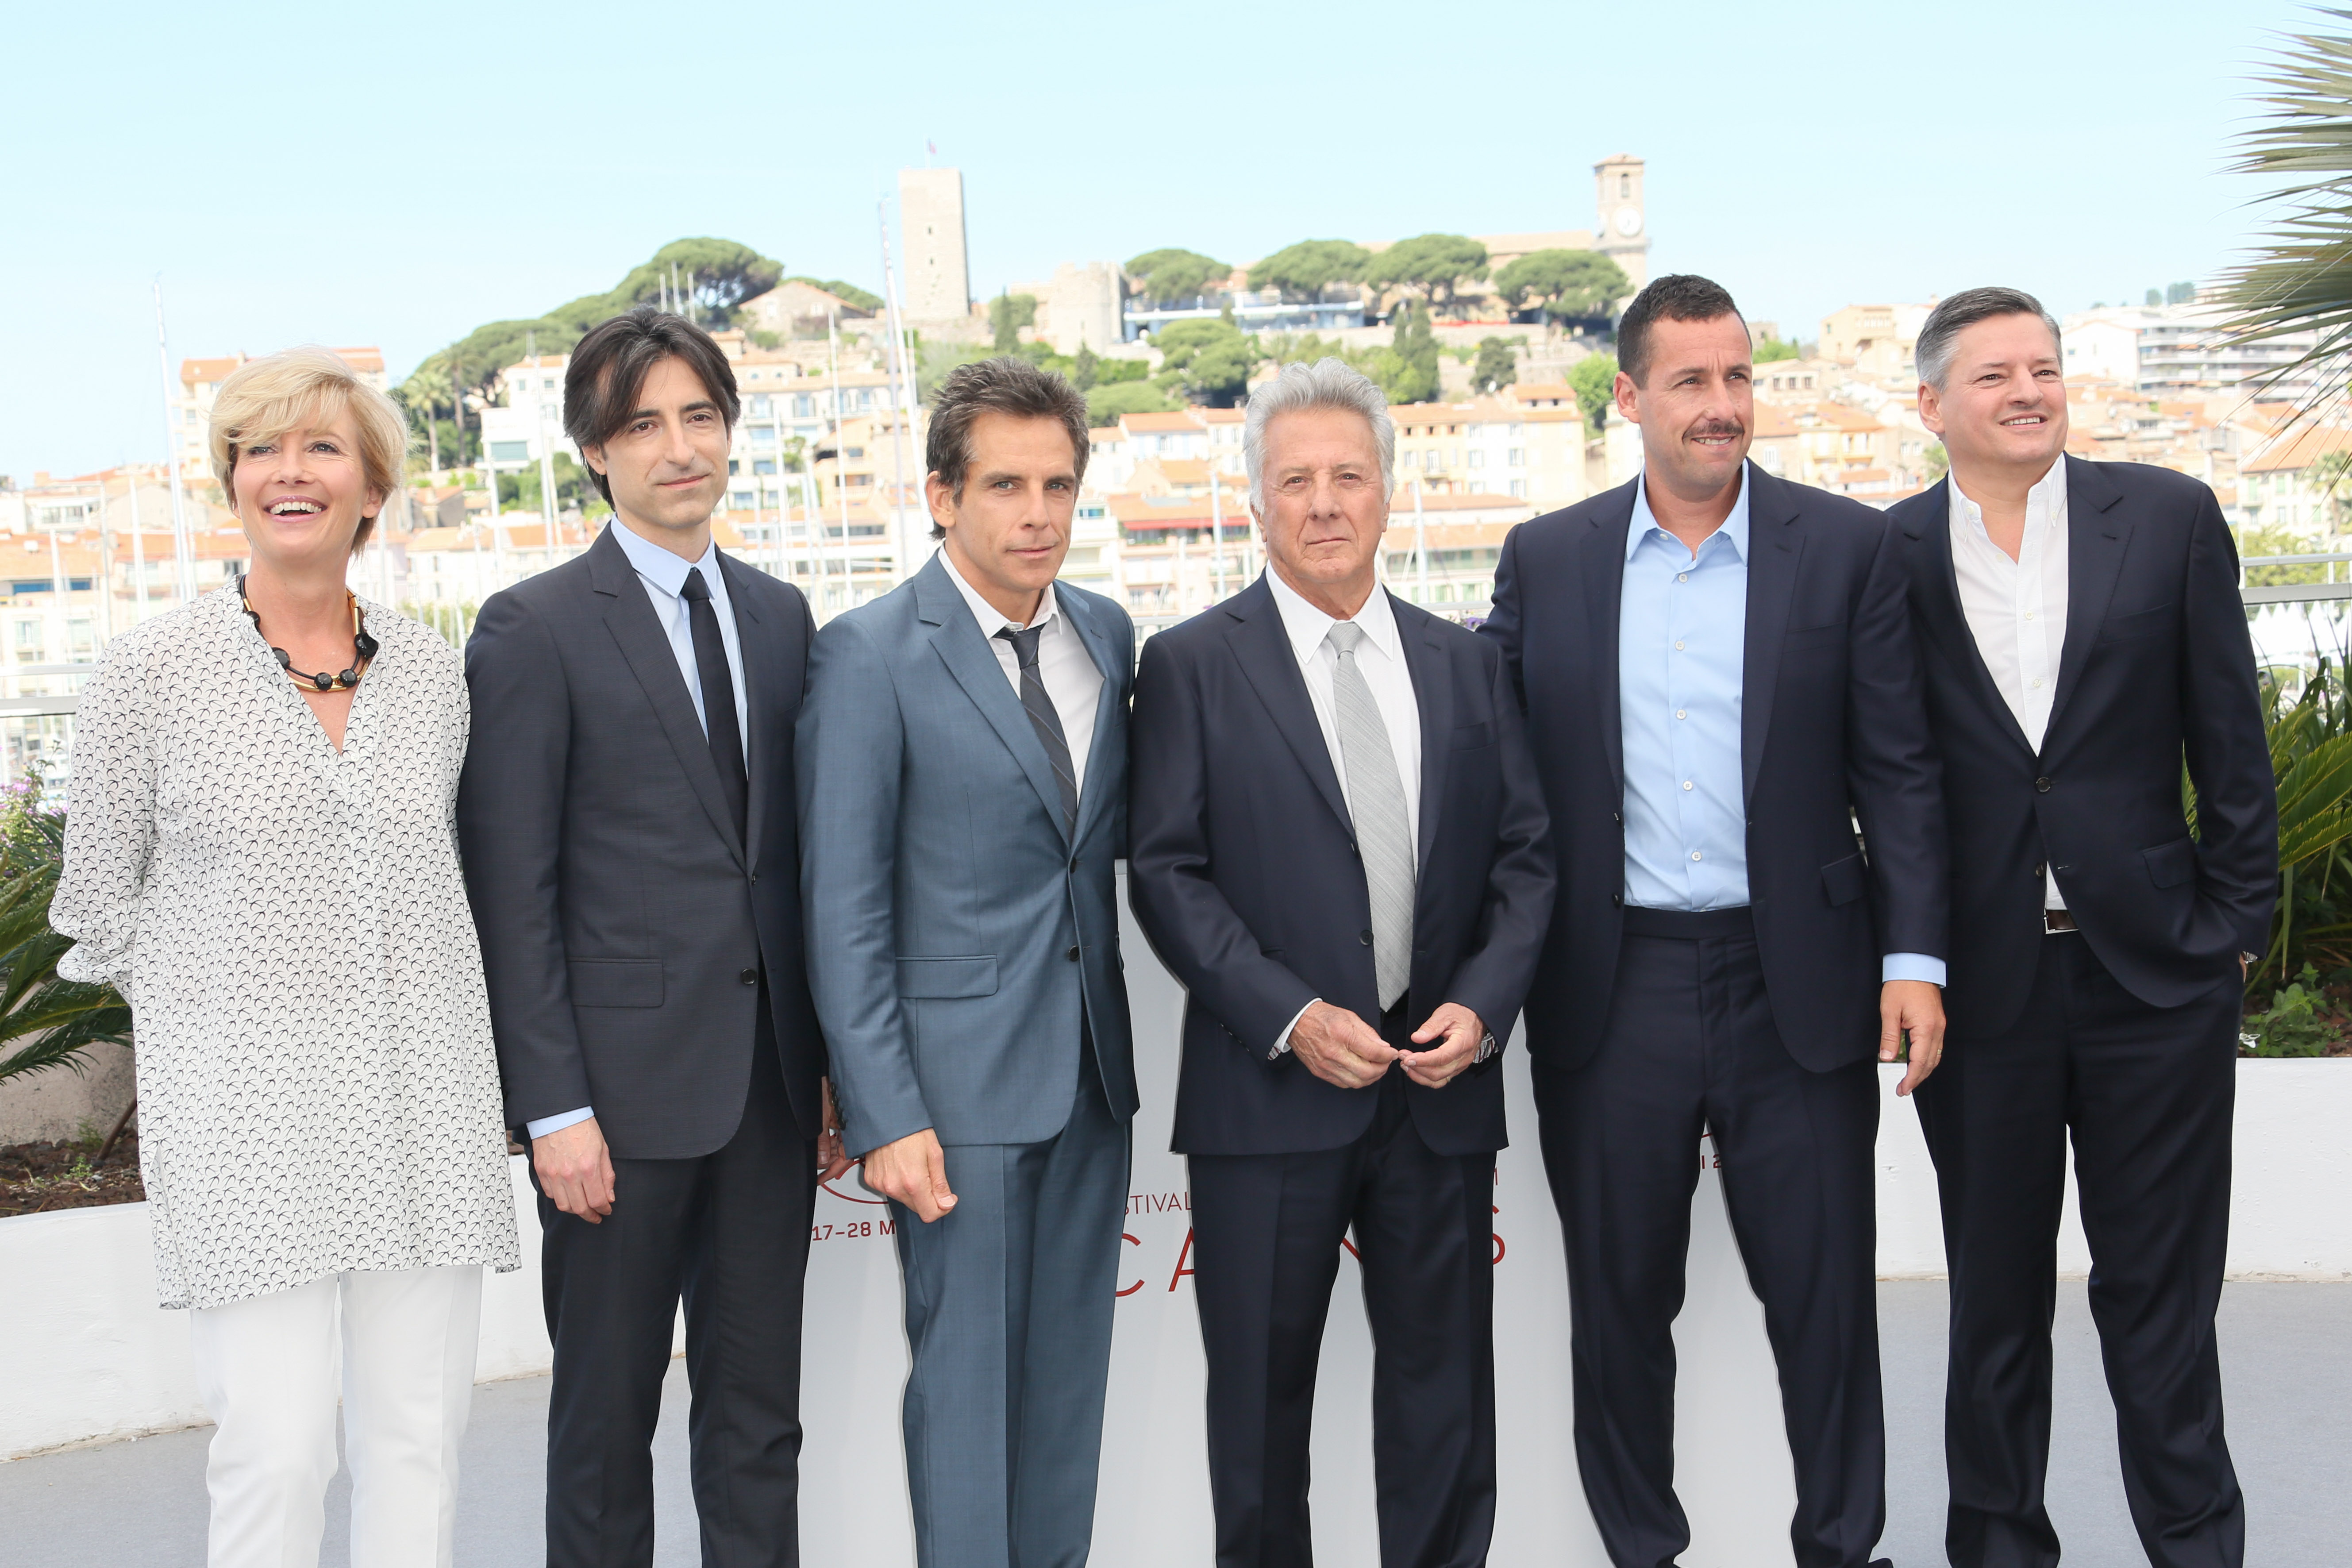 Emma Thompson, director Noah Baumbach, actors Ben Stiller, Dustin Hoffman, Adam Sandler and Netflix CEO Ted Sarandos at the "The Meyerowitz Stories" Photocall at the Cannes Film Festival in 2017 | Source: Getty Images